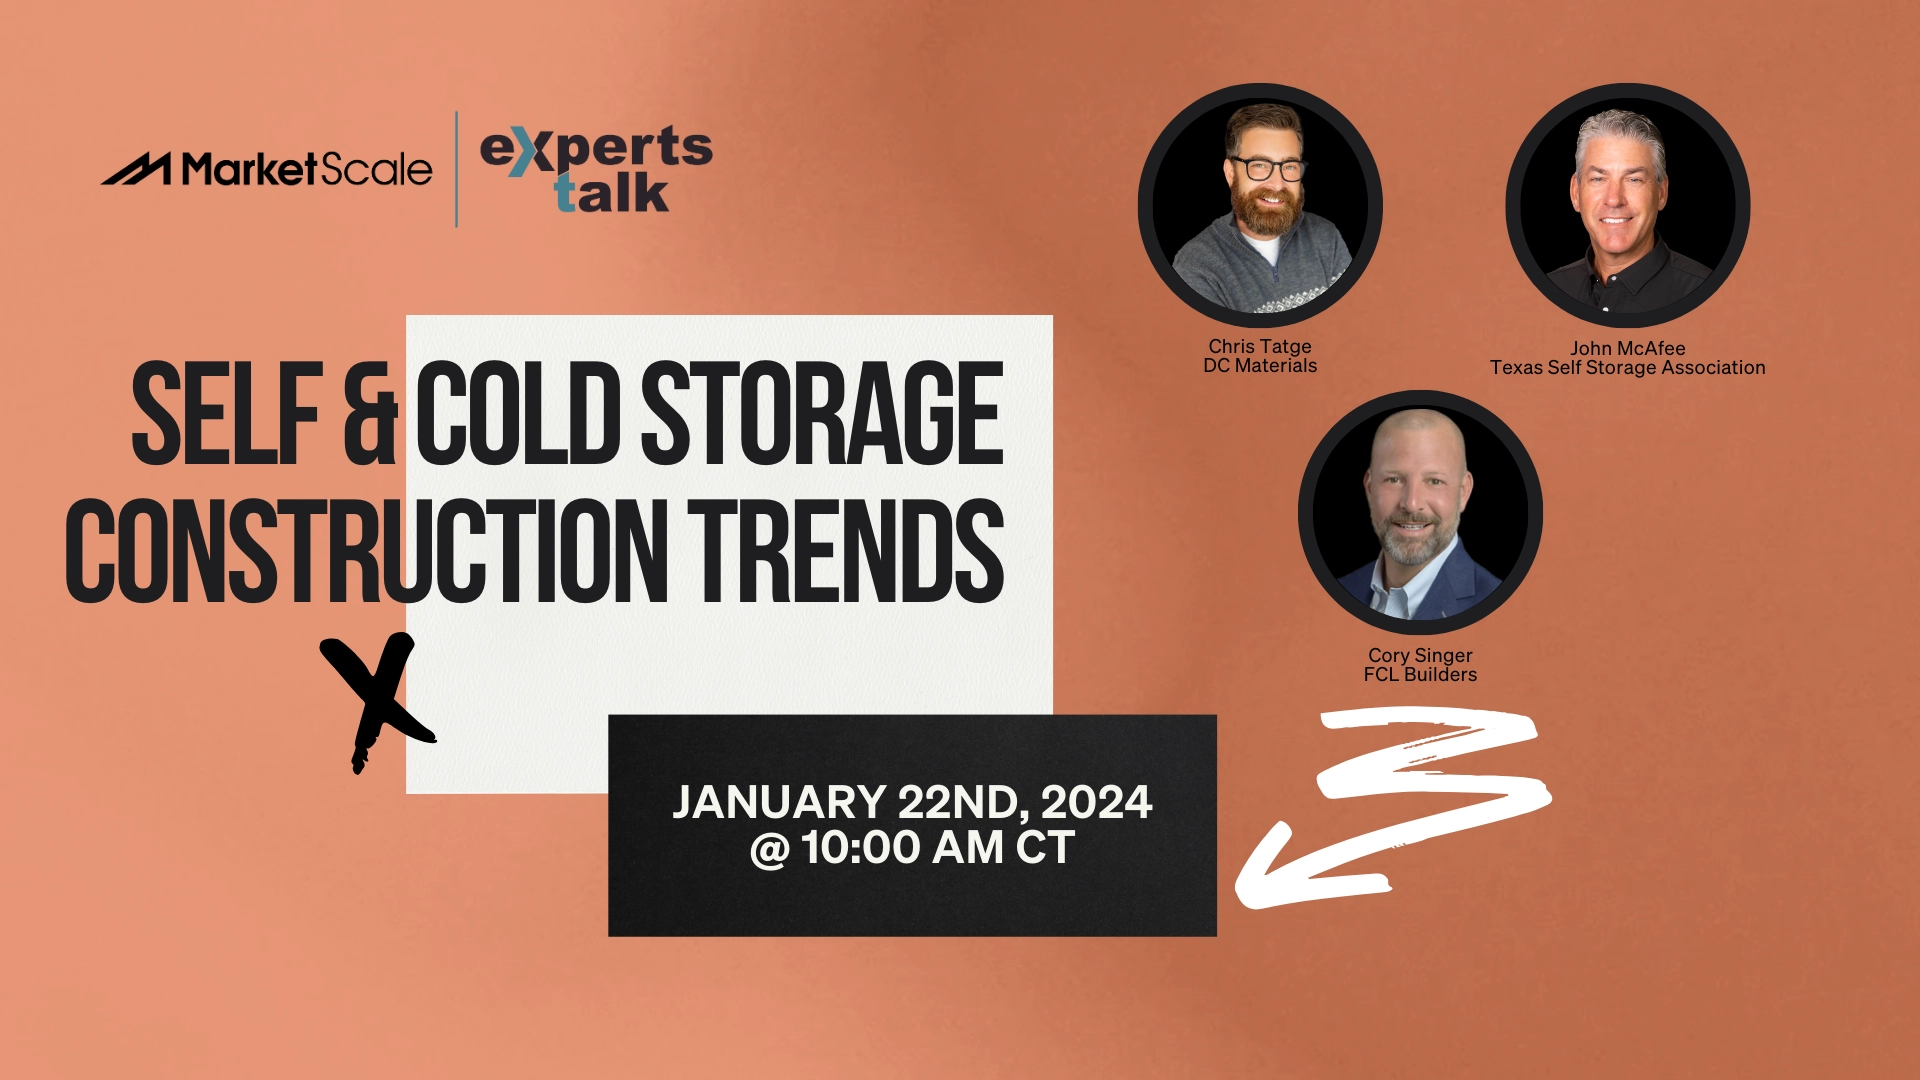 Cold & Self-Storage Construction Trends: Consumer Preferences, Tertiary Markets, and Technology Investment Will Make the Difference in 2024